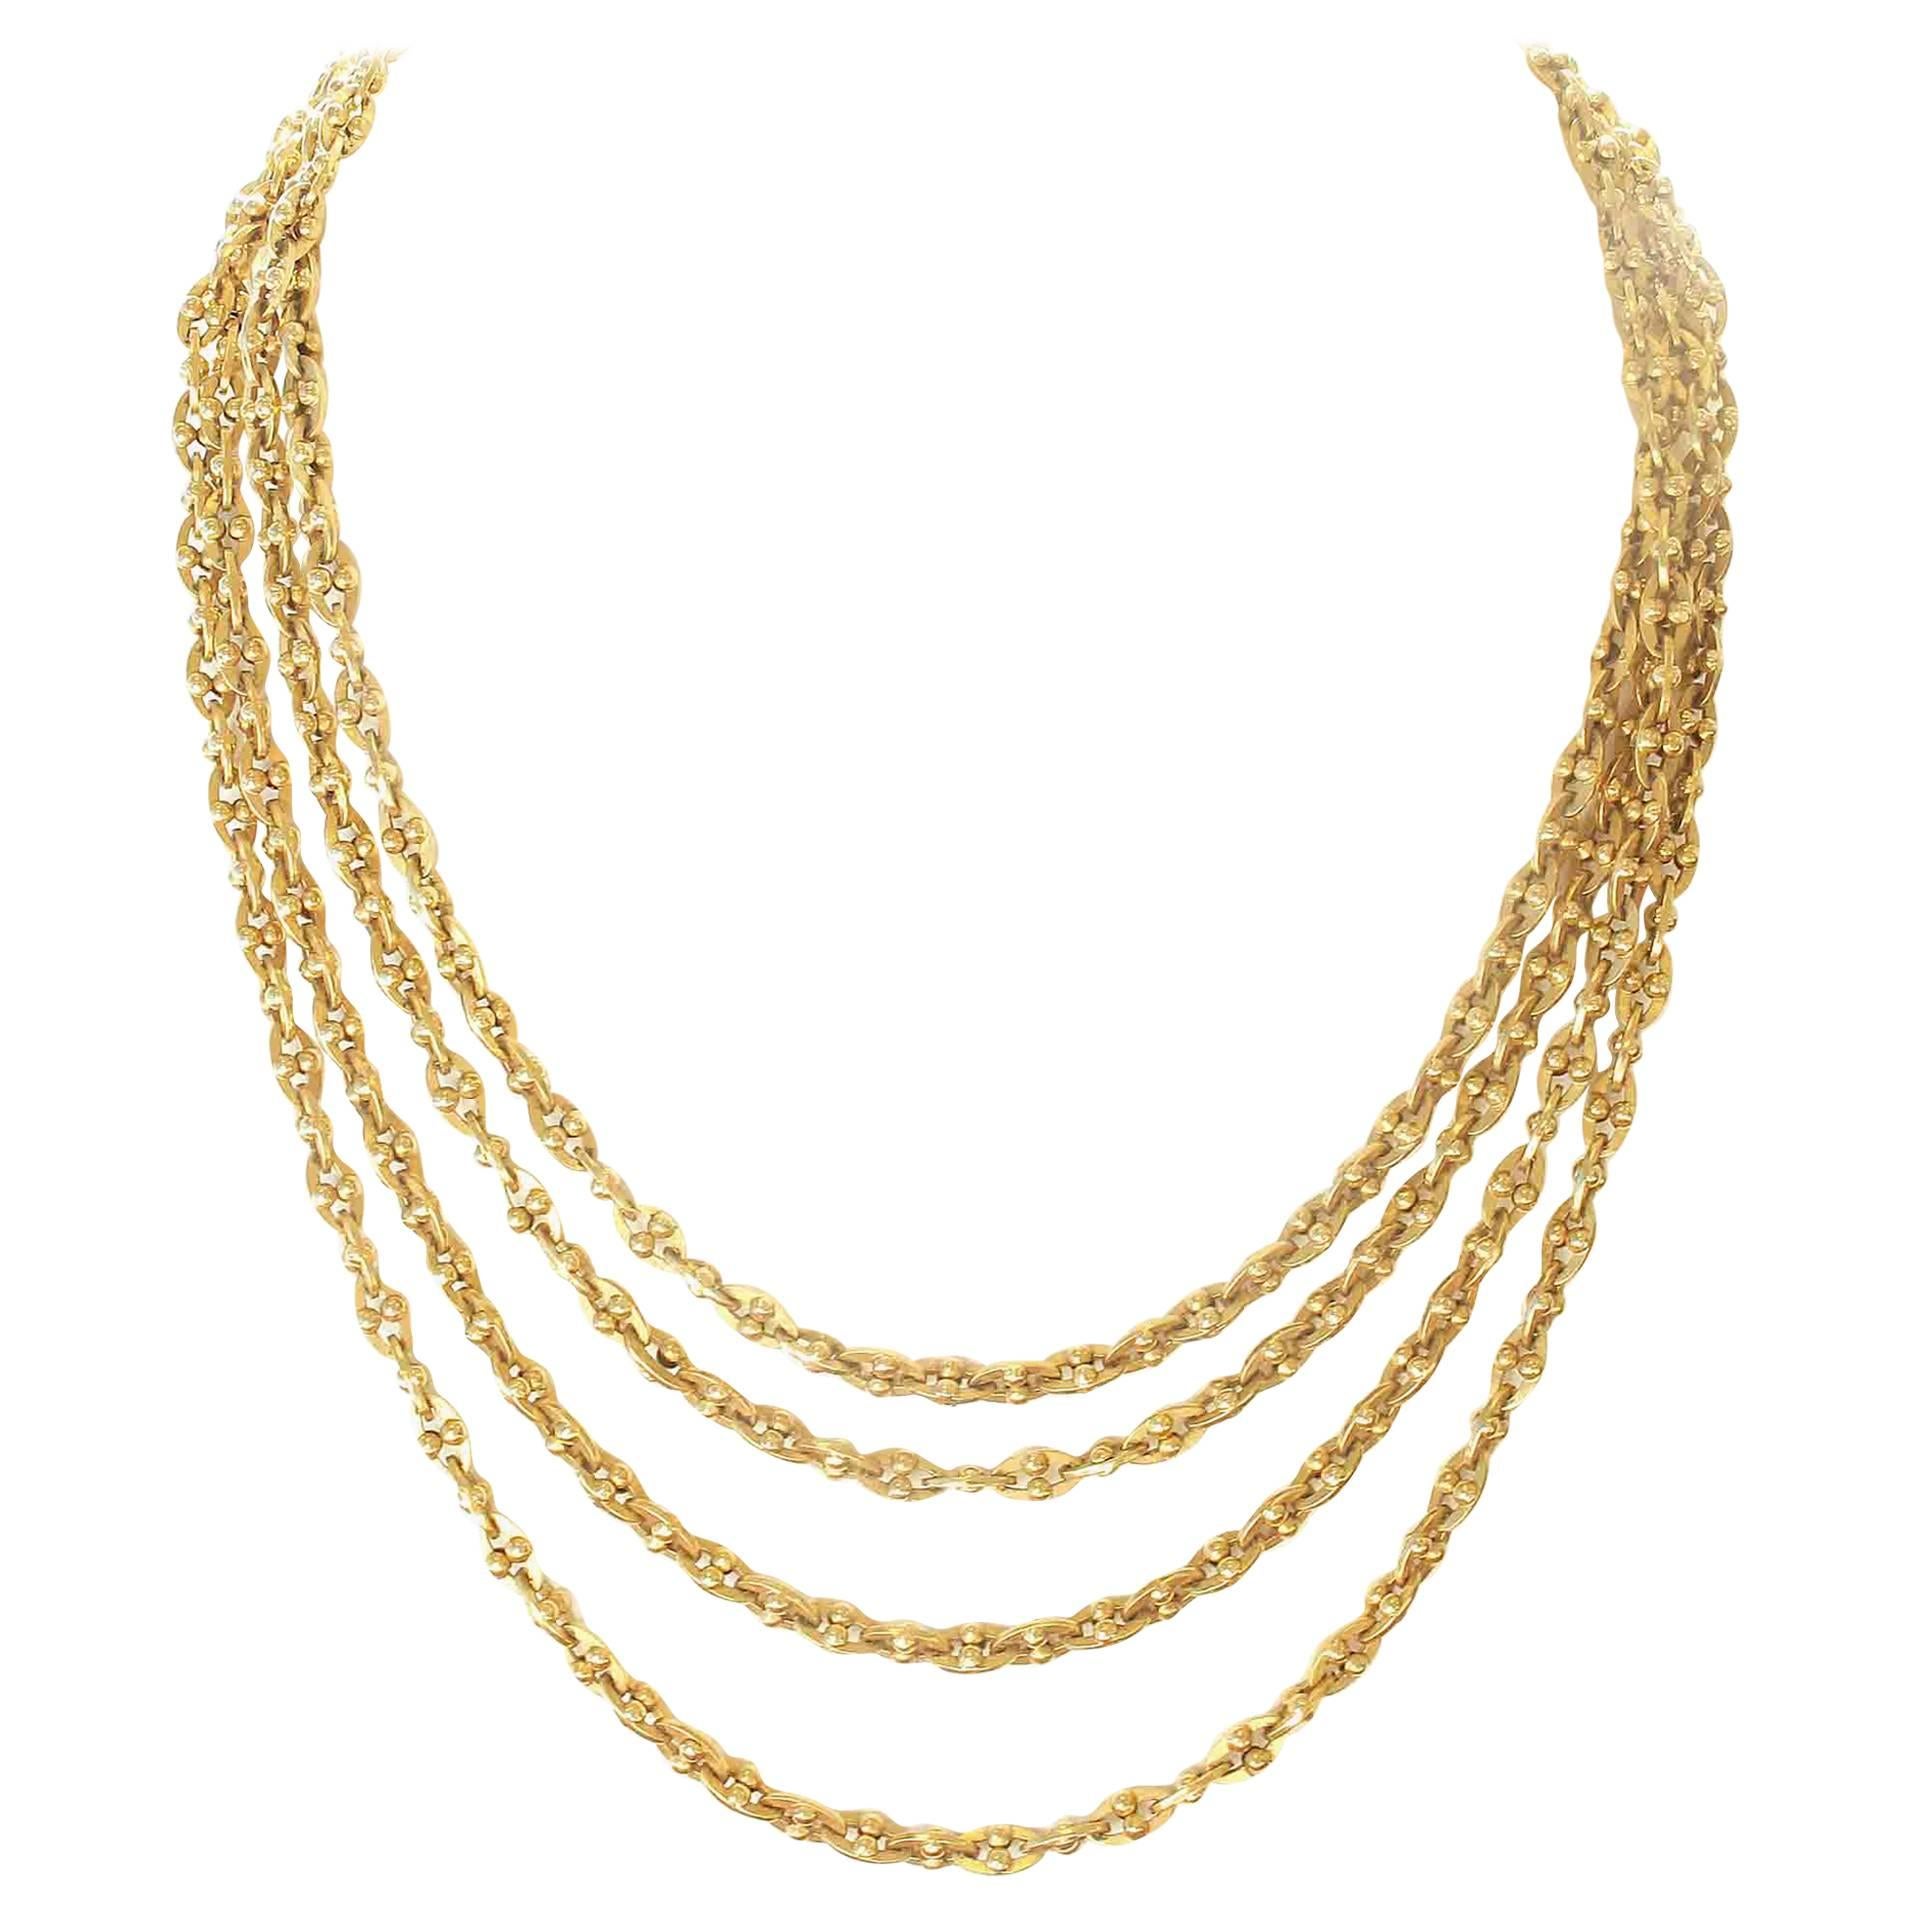  Long French Gold Link Necklace